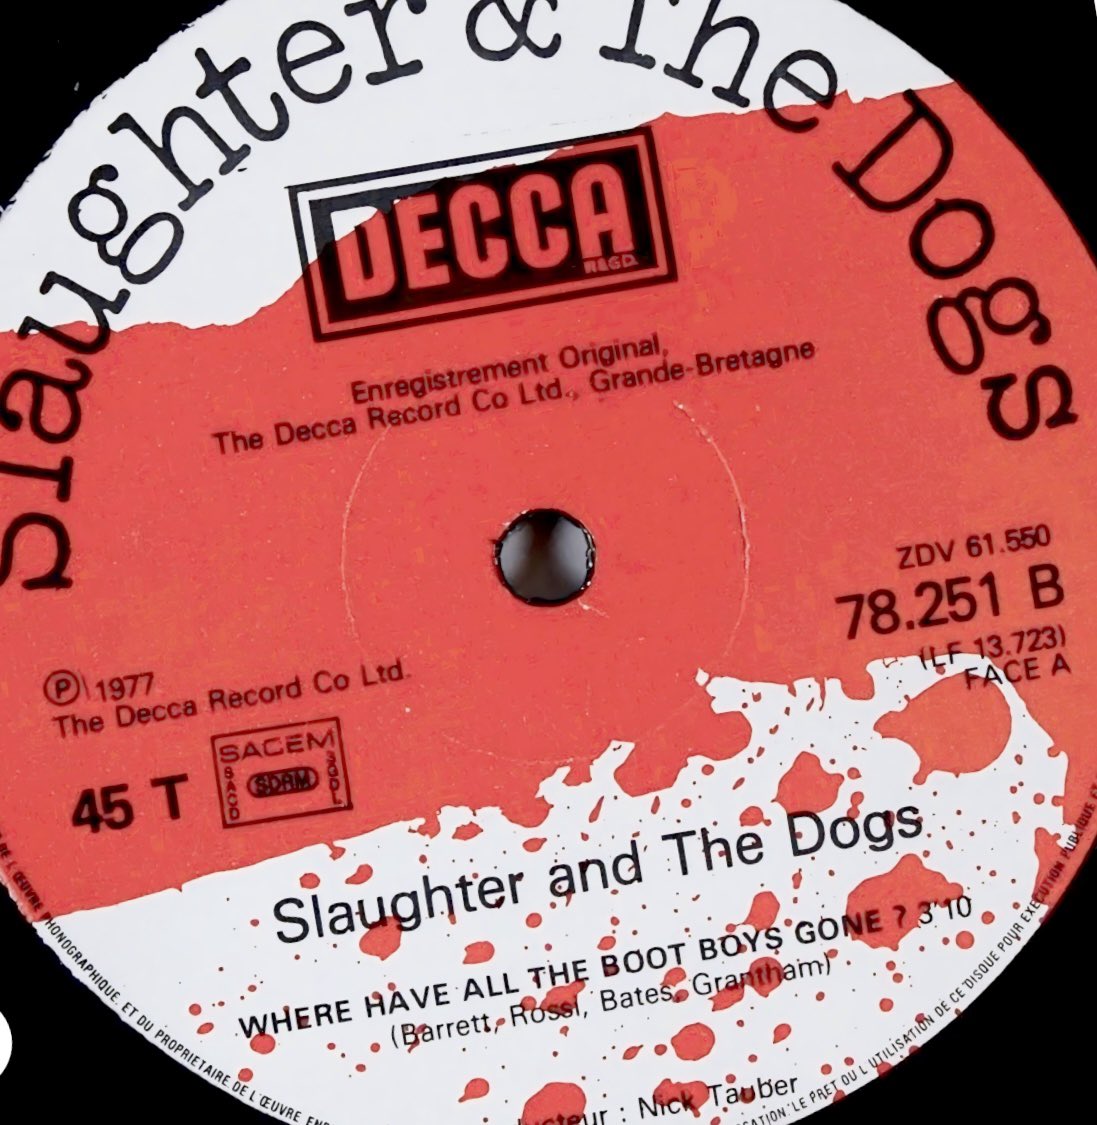 Slaughter and the Dogs Where Have All The Boot Boys Gone Ⓟ 1977 @NewWaveAndPunk #slaughterandthedogs #punkrock #punk #music #vinylrecords #vinylcollection #70s